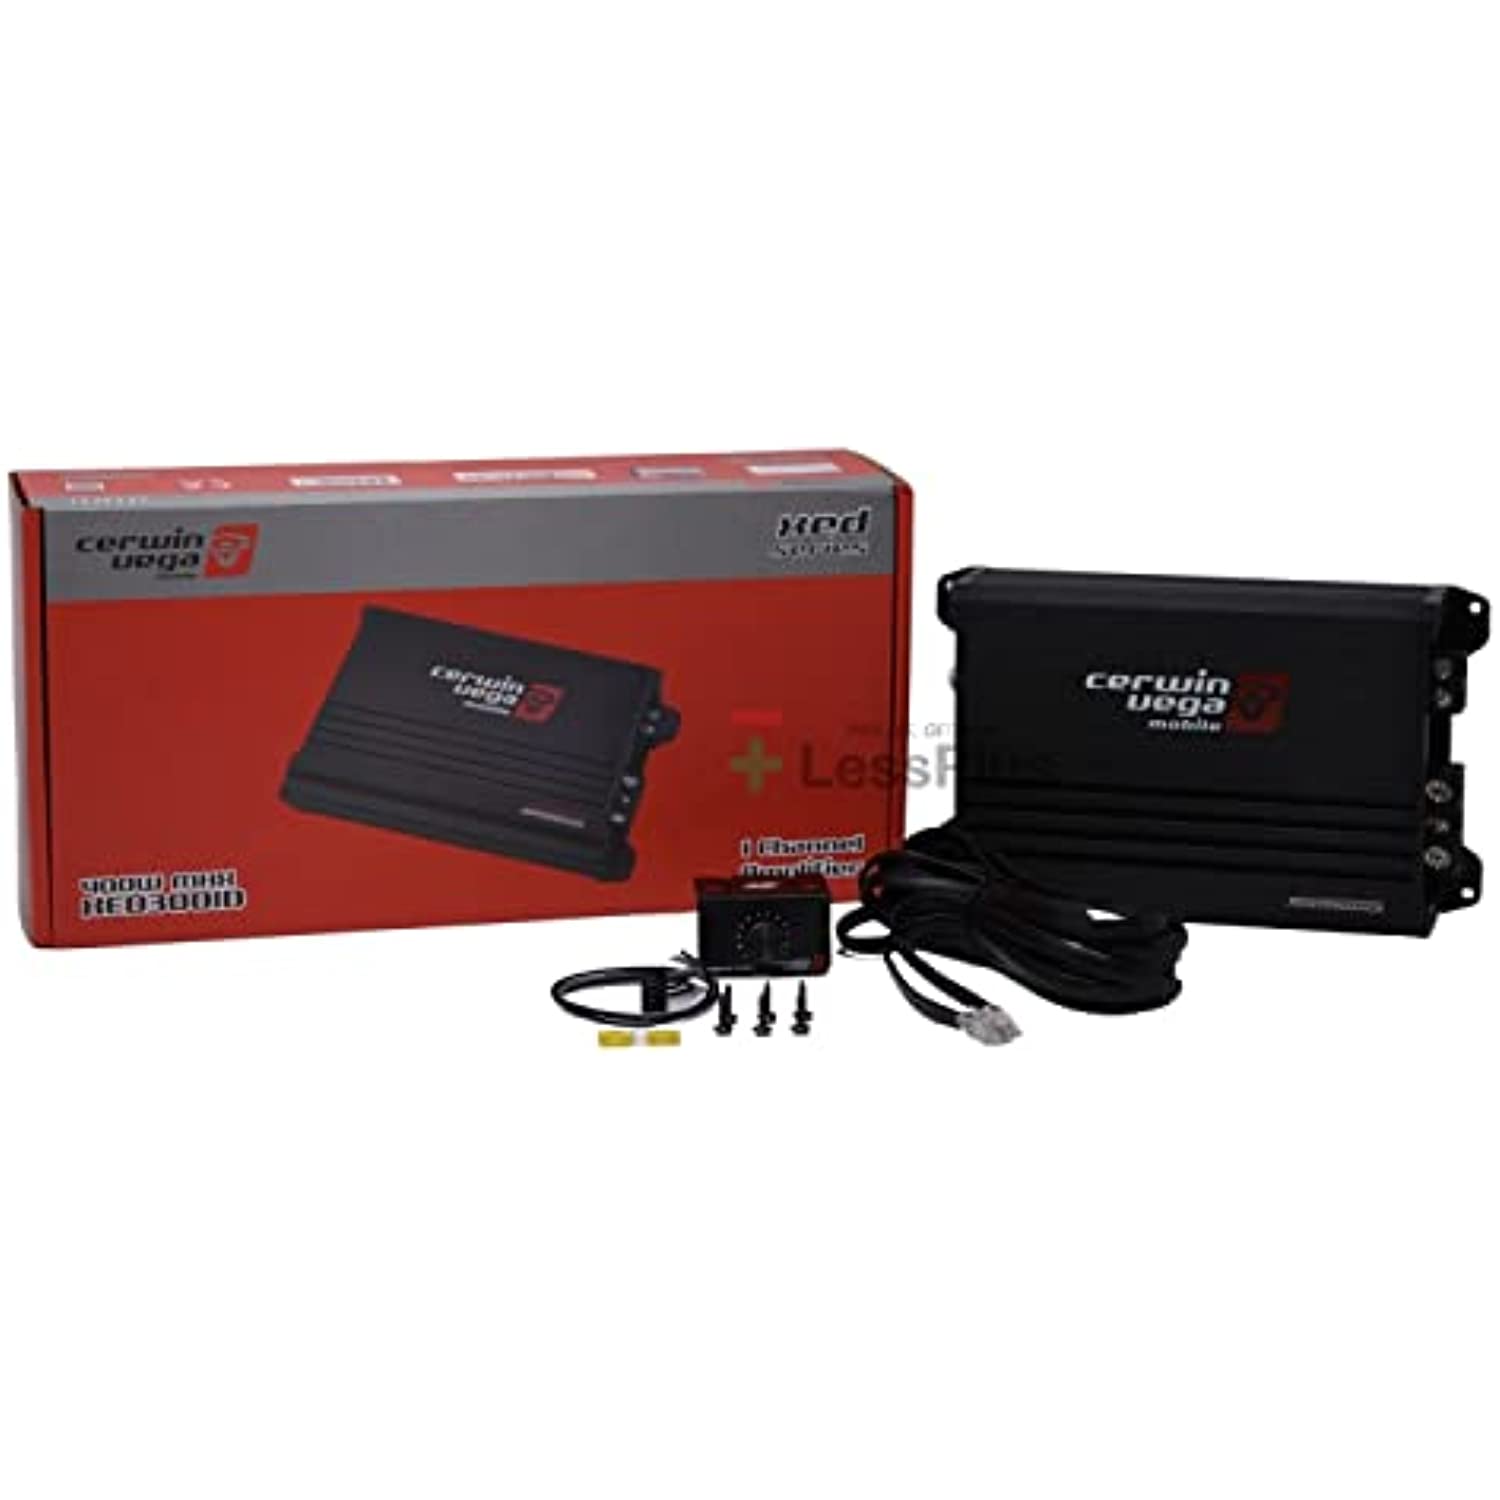 CERWIN Vega XED3001 300W Max 1-Channel Class D Amplifier w/Remote Bass Knob (New Arrival)